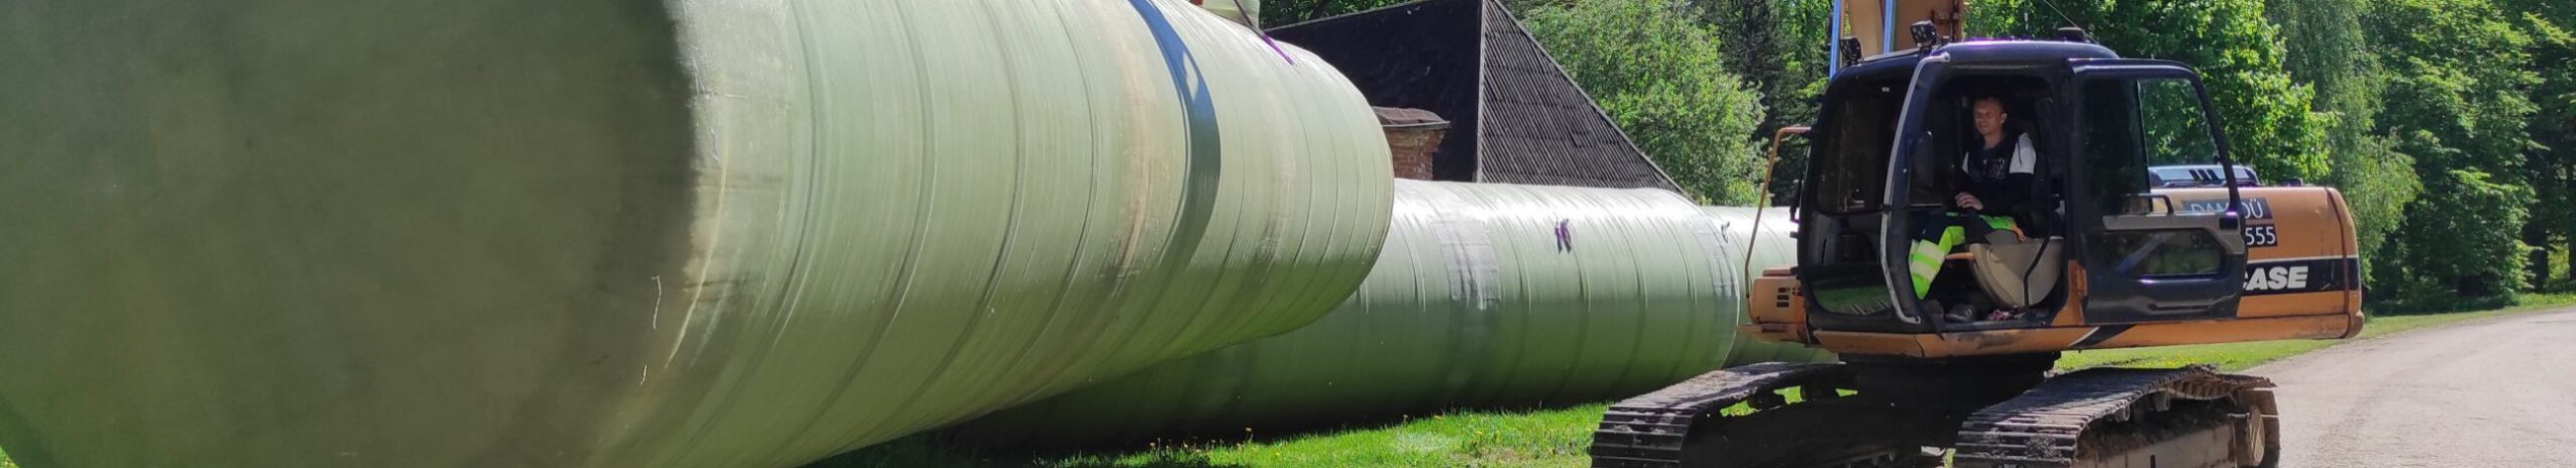 We specialize in the installation of septic systems, bio-cleaners, and water tanks, ensuring efficient water and sanitation routes for our clients.